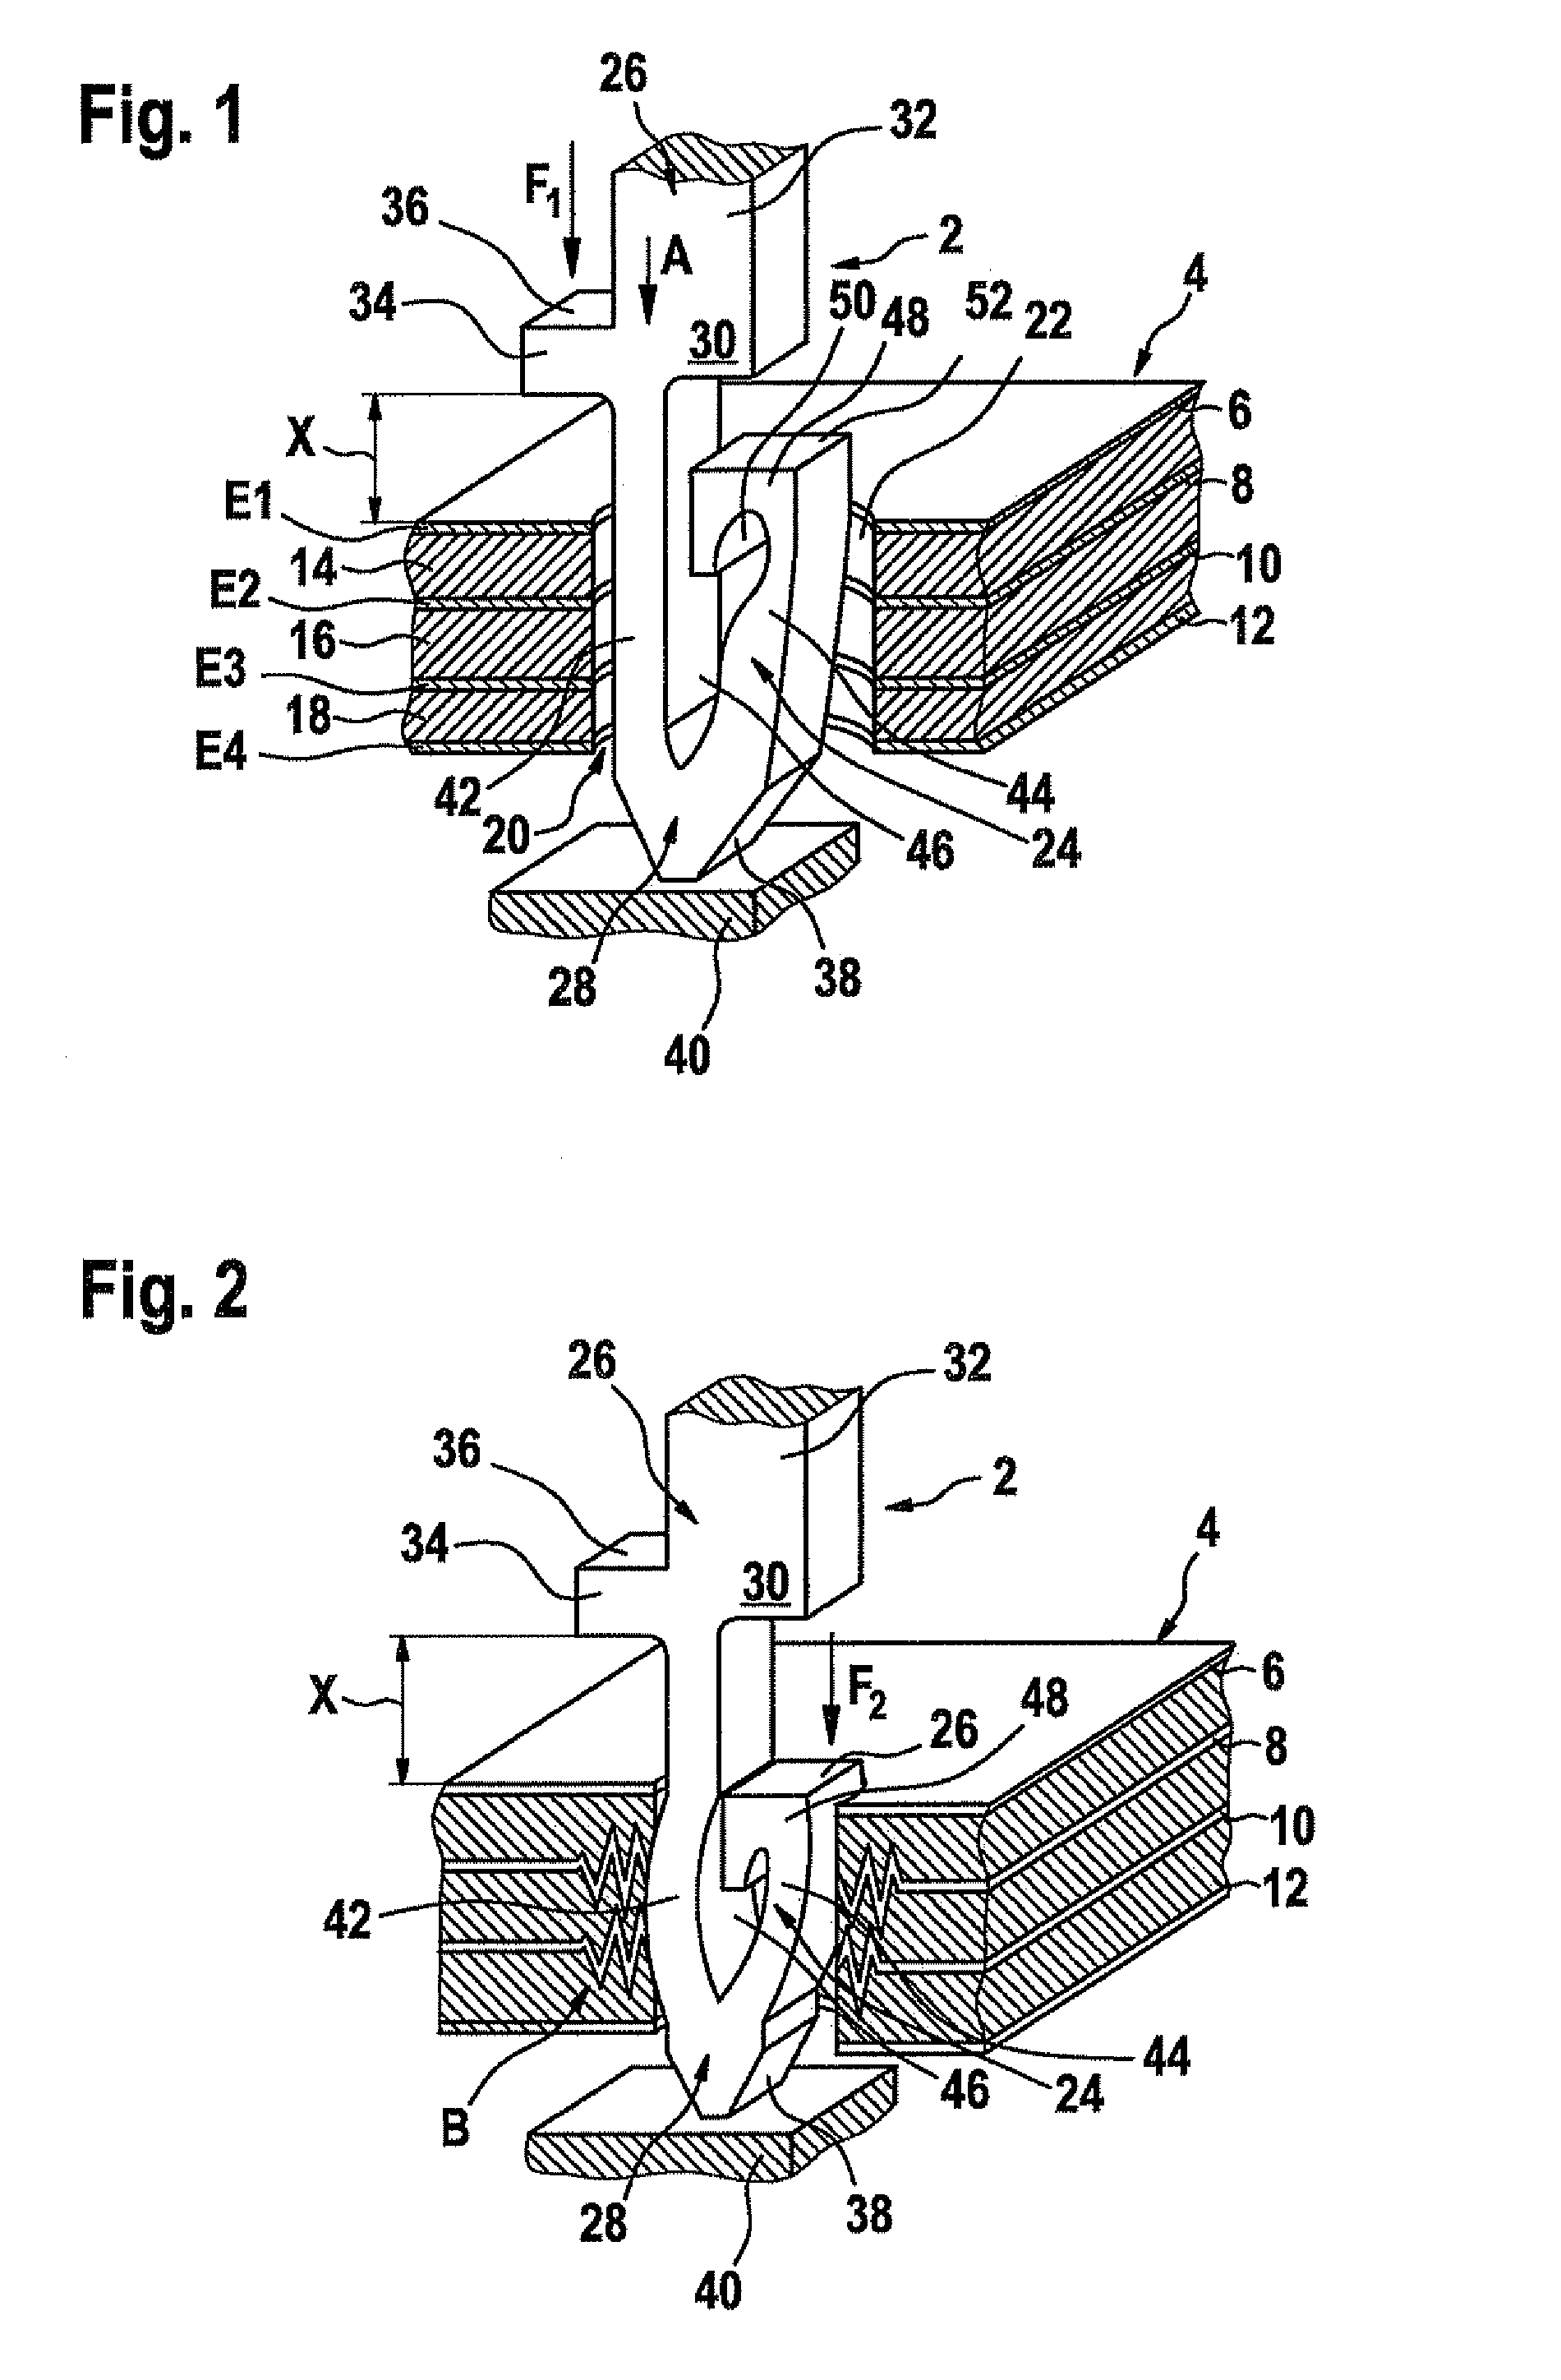 Pin for insertion into a receiving opening in a printed circuit board and method for inserting a pin into a receiving opening in a printed circuit board